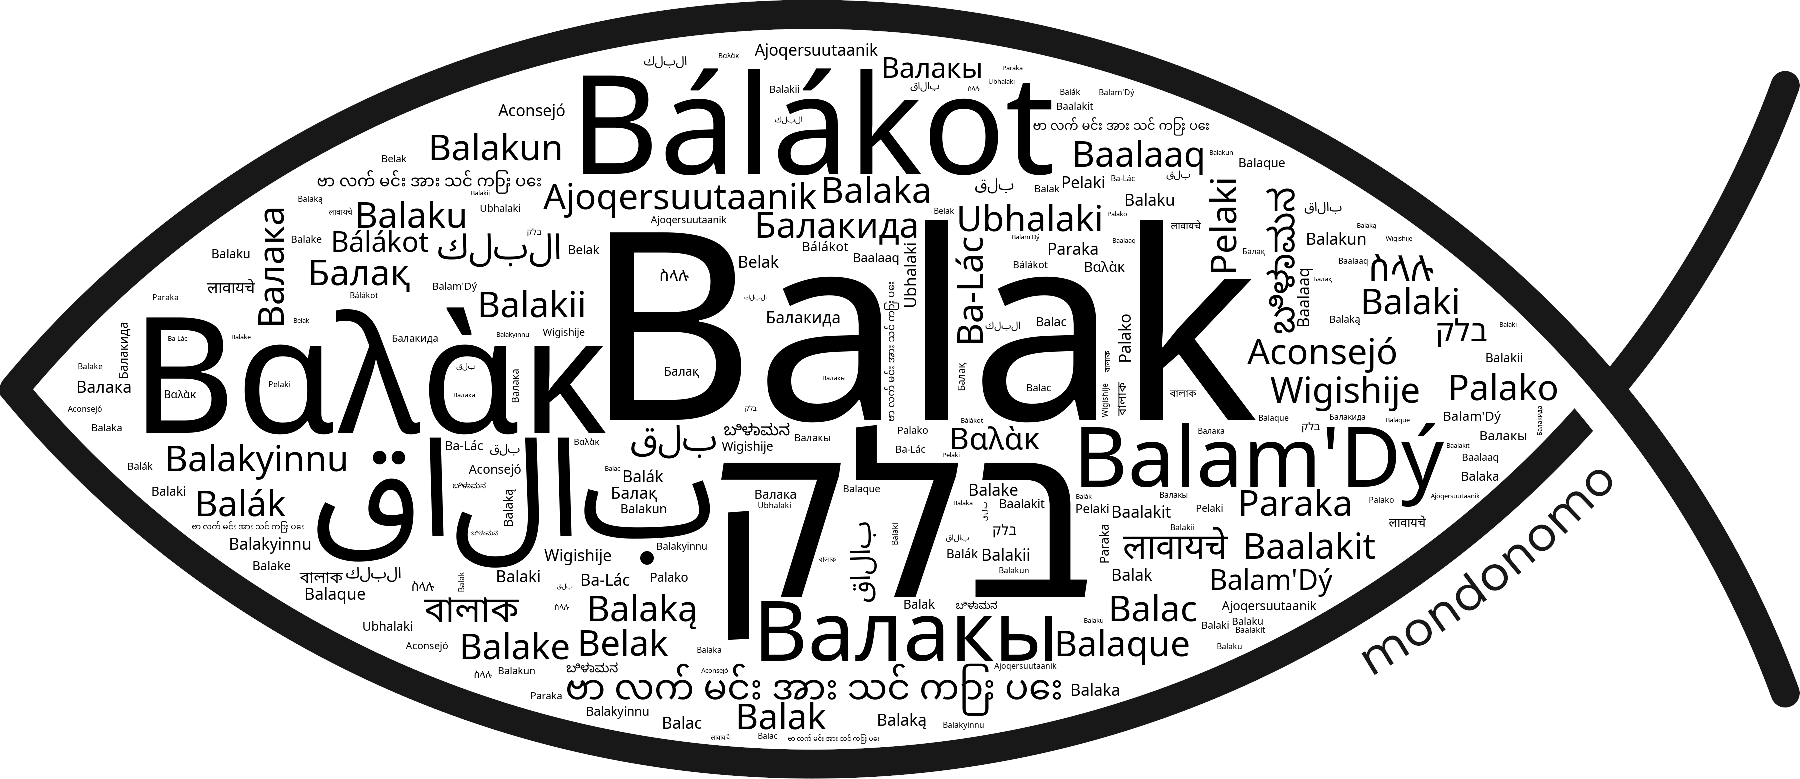 Name Balak in the world's Bibles